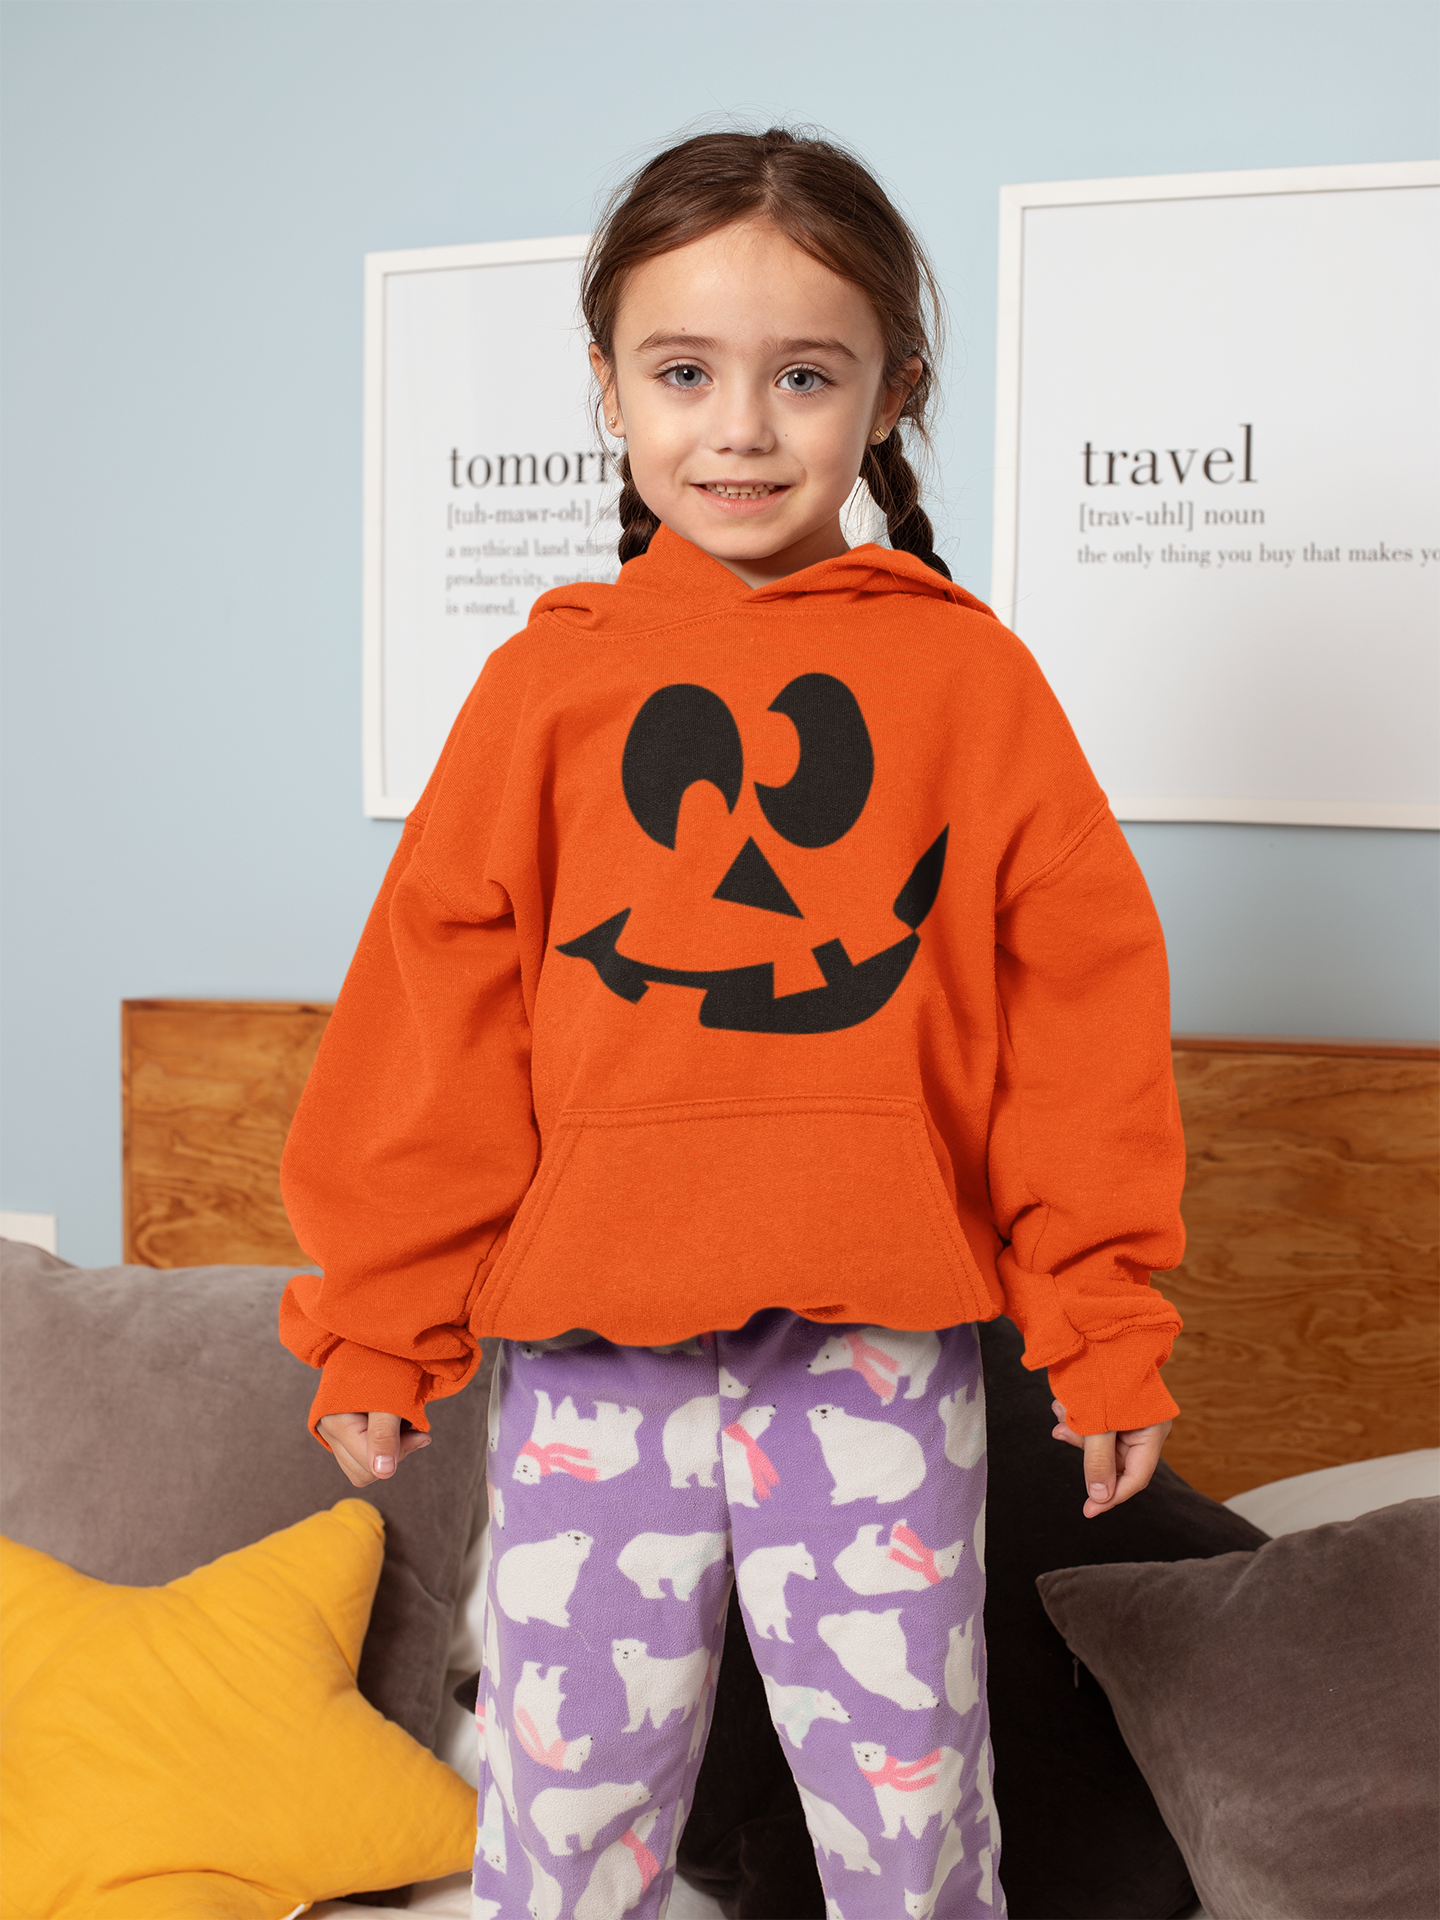 Faces of Halloween Hoodie YOUTH